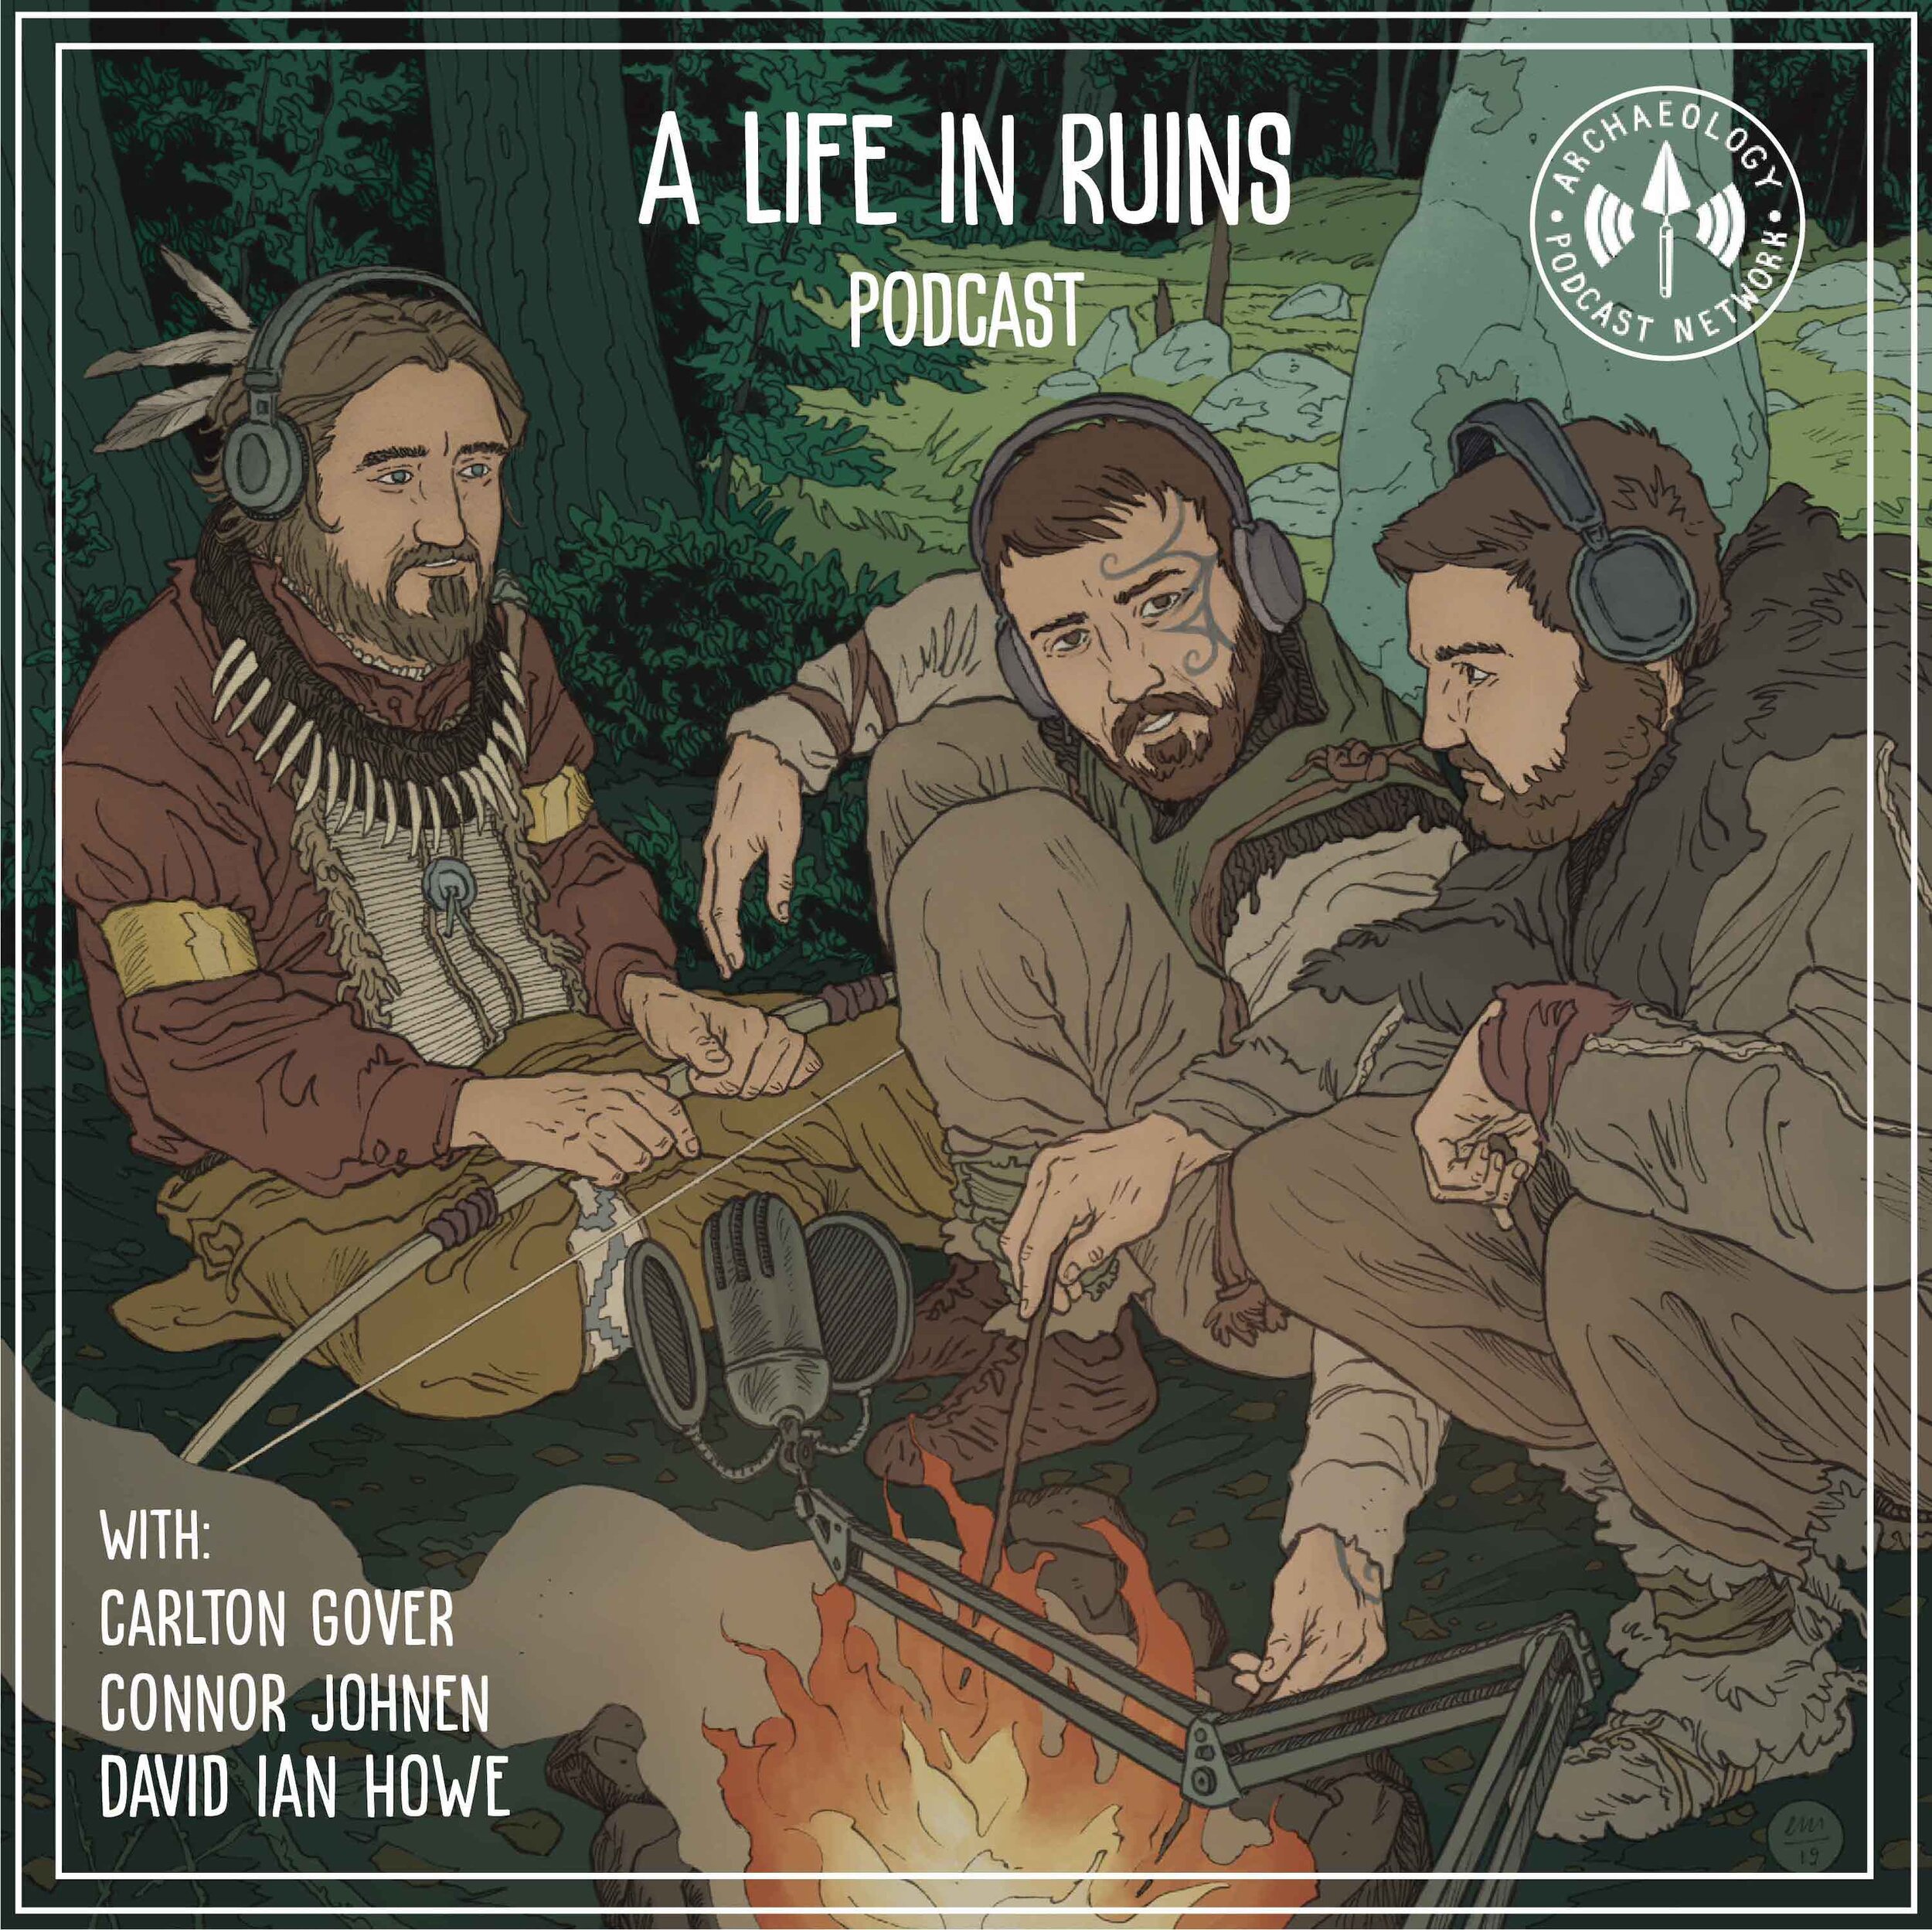 2020 A Life In Ruins Podcast.jpg